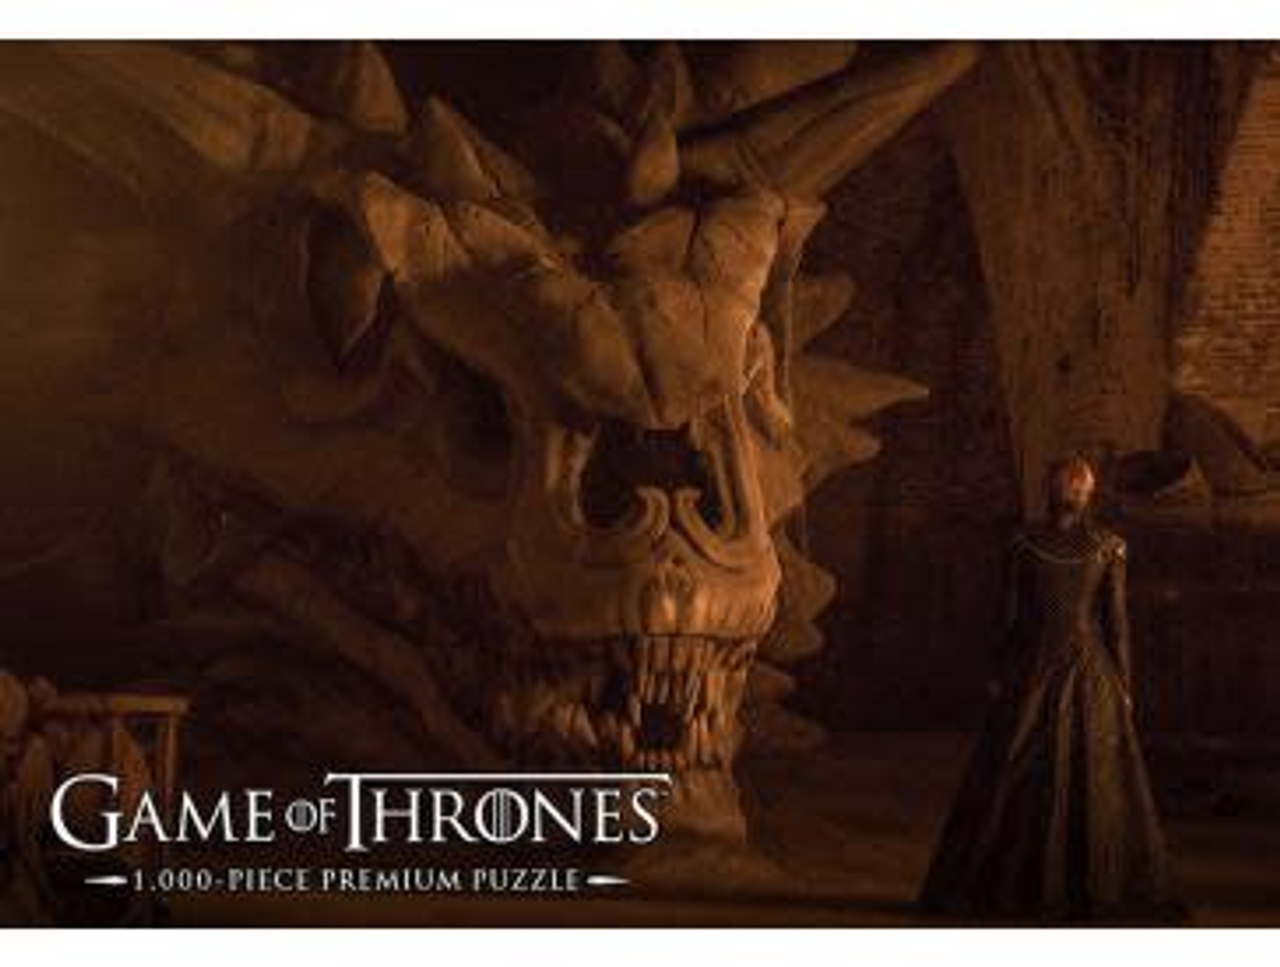 Game of Thrones "Balerion The Black Dread" 1000 Piece Puzzle